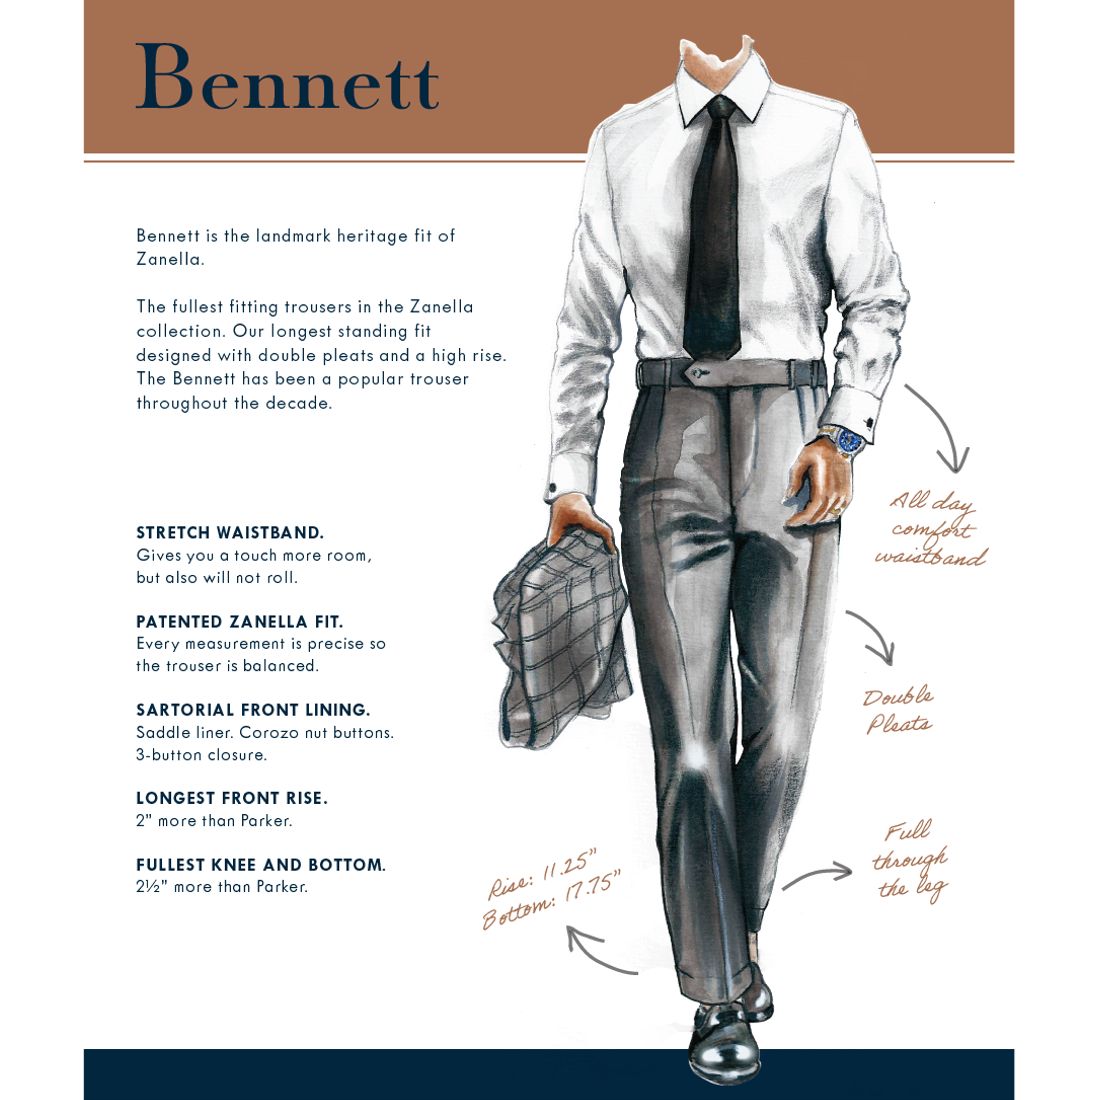 Bennett Double Pleated Super 120s Wool Flannel Trouser in Tan and Grey Mélange (Full Fit) - LIMITED EDITION by Zanella